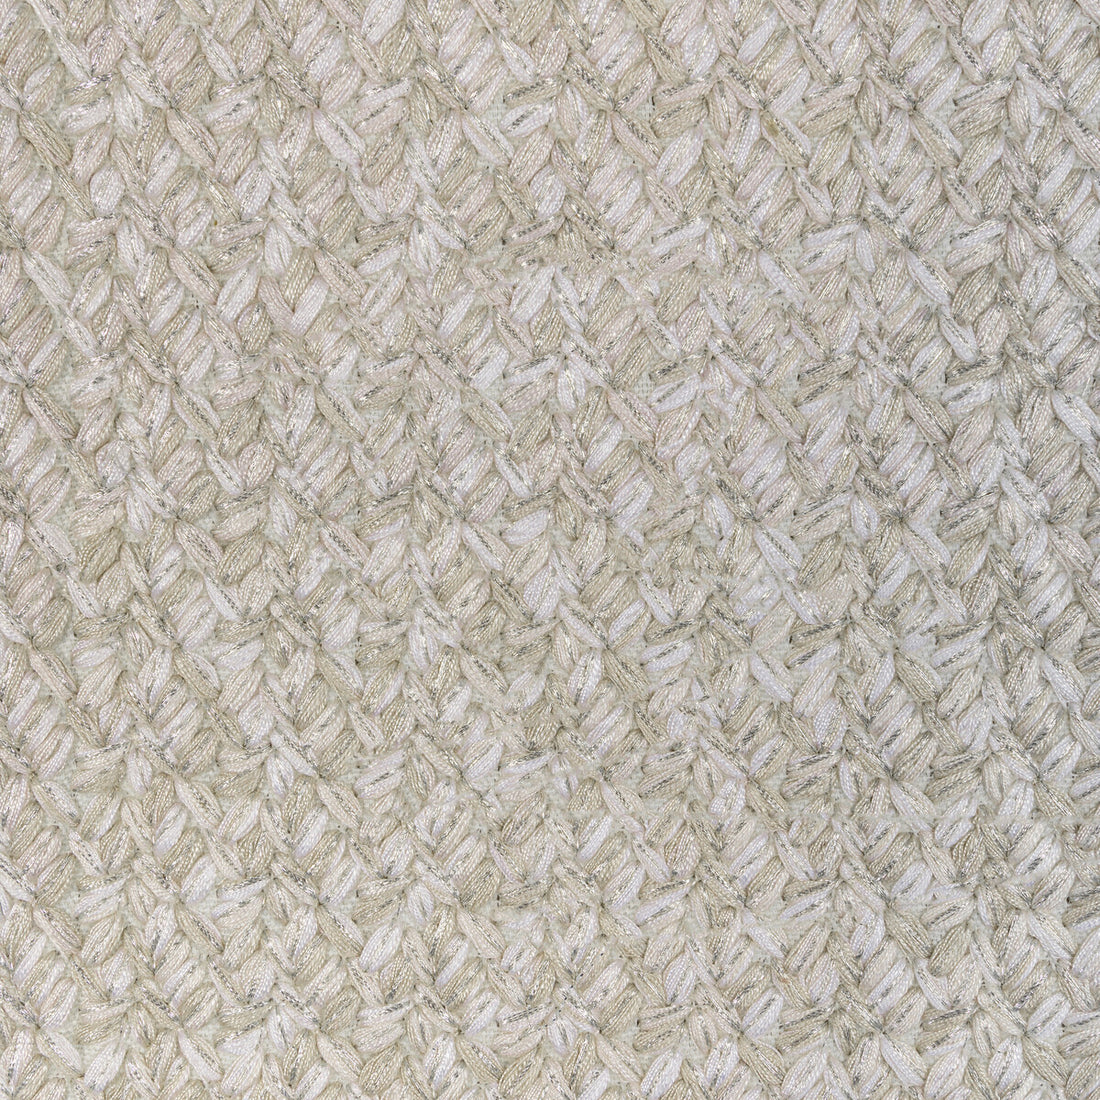 Gilded Lacing fabric in natural silver color - pattern 36314.116.0 - by Kravet Couture in the Modern Luxe III collection